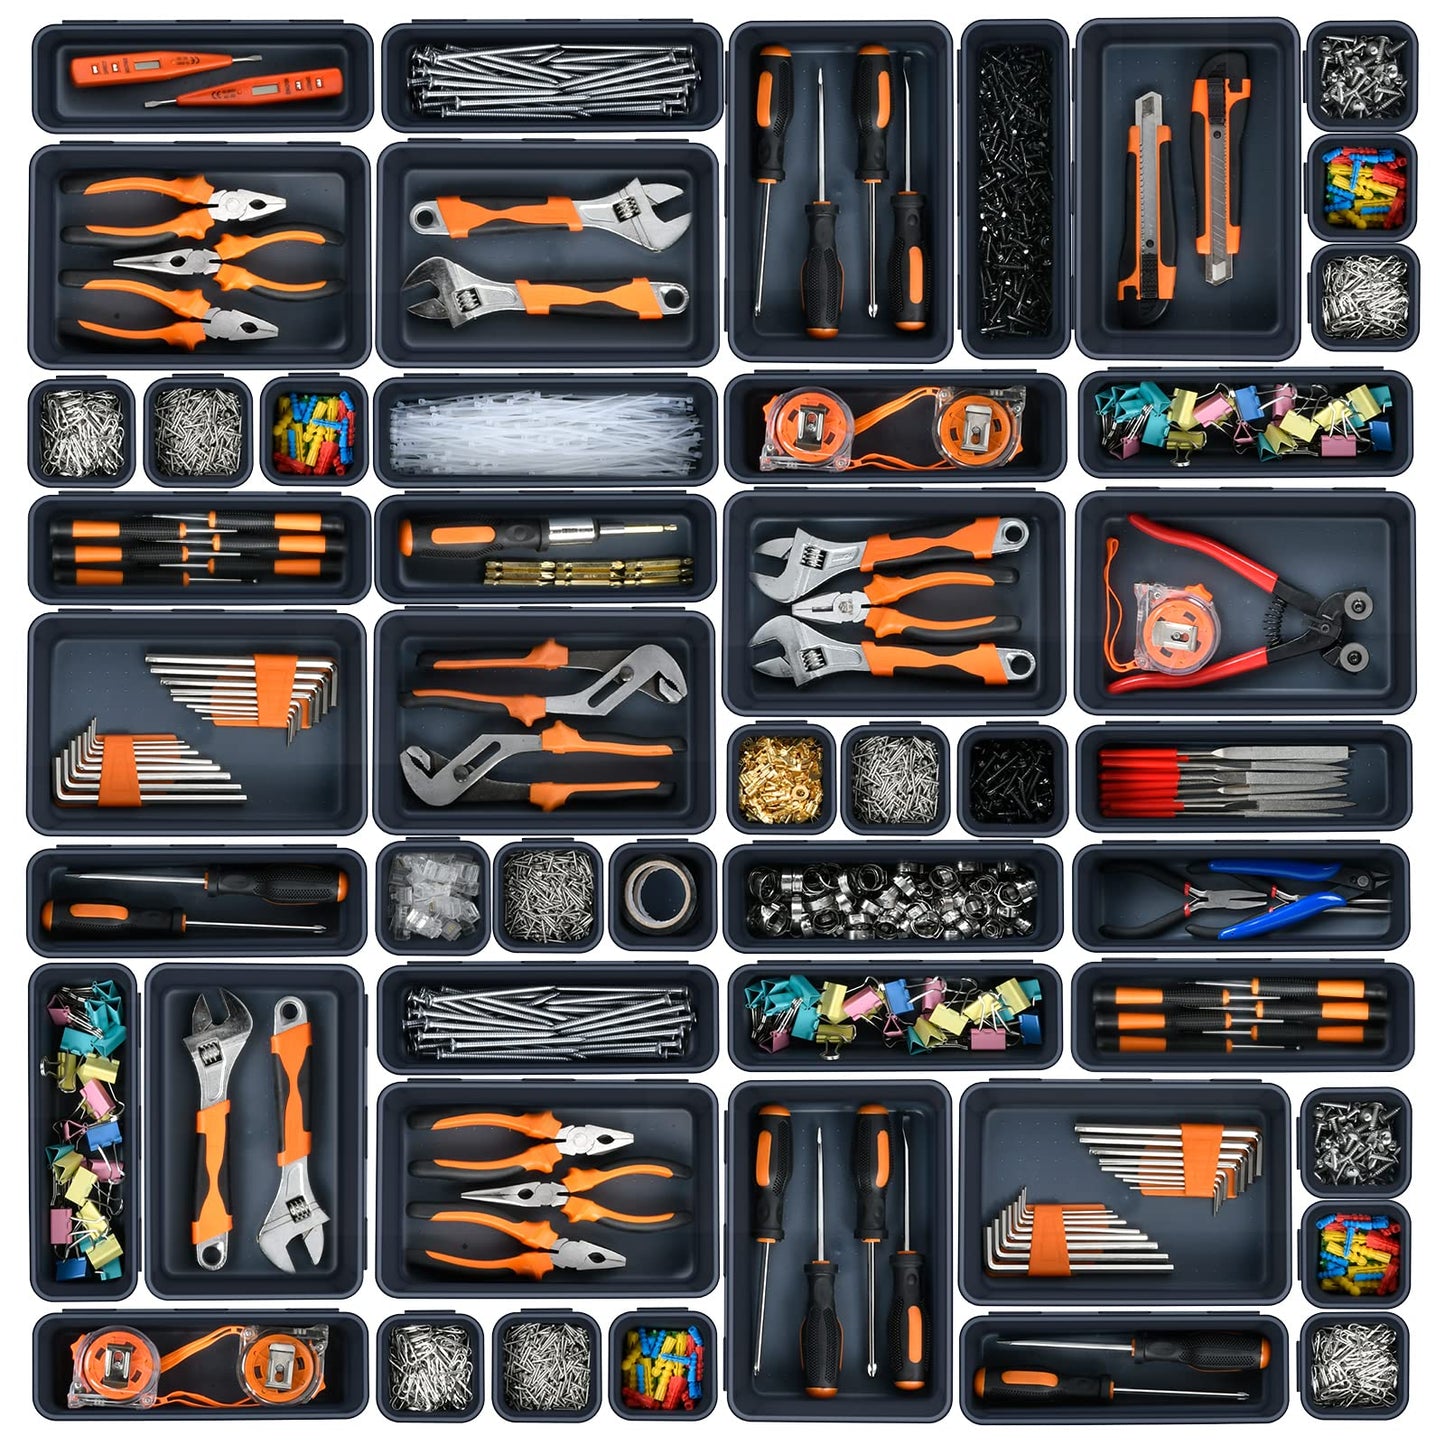 【𝟯𝟮𝗣𝗖𝗦】A-LUGEI Tool Box Organizer Tray Divider Set, Desk Drawer Organizer, Garage Organization and Storage Toolbox Accessories for Rolling Tool Chest